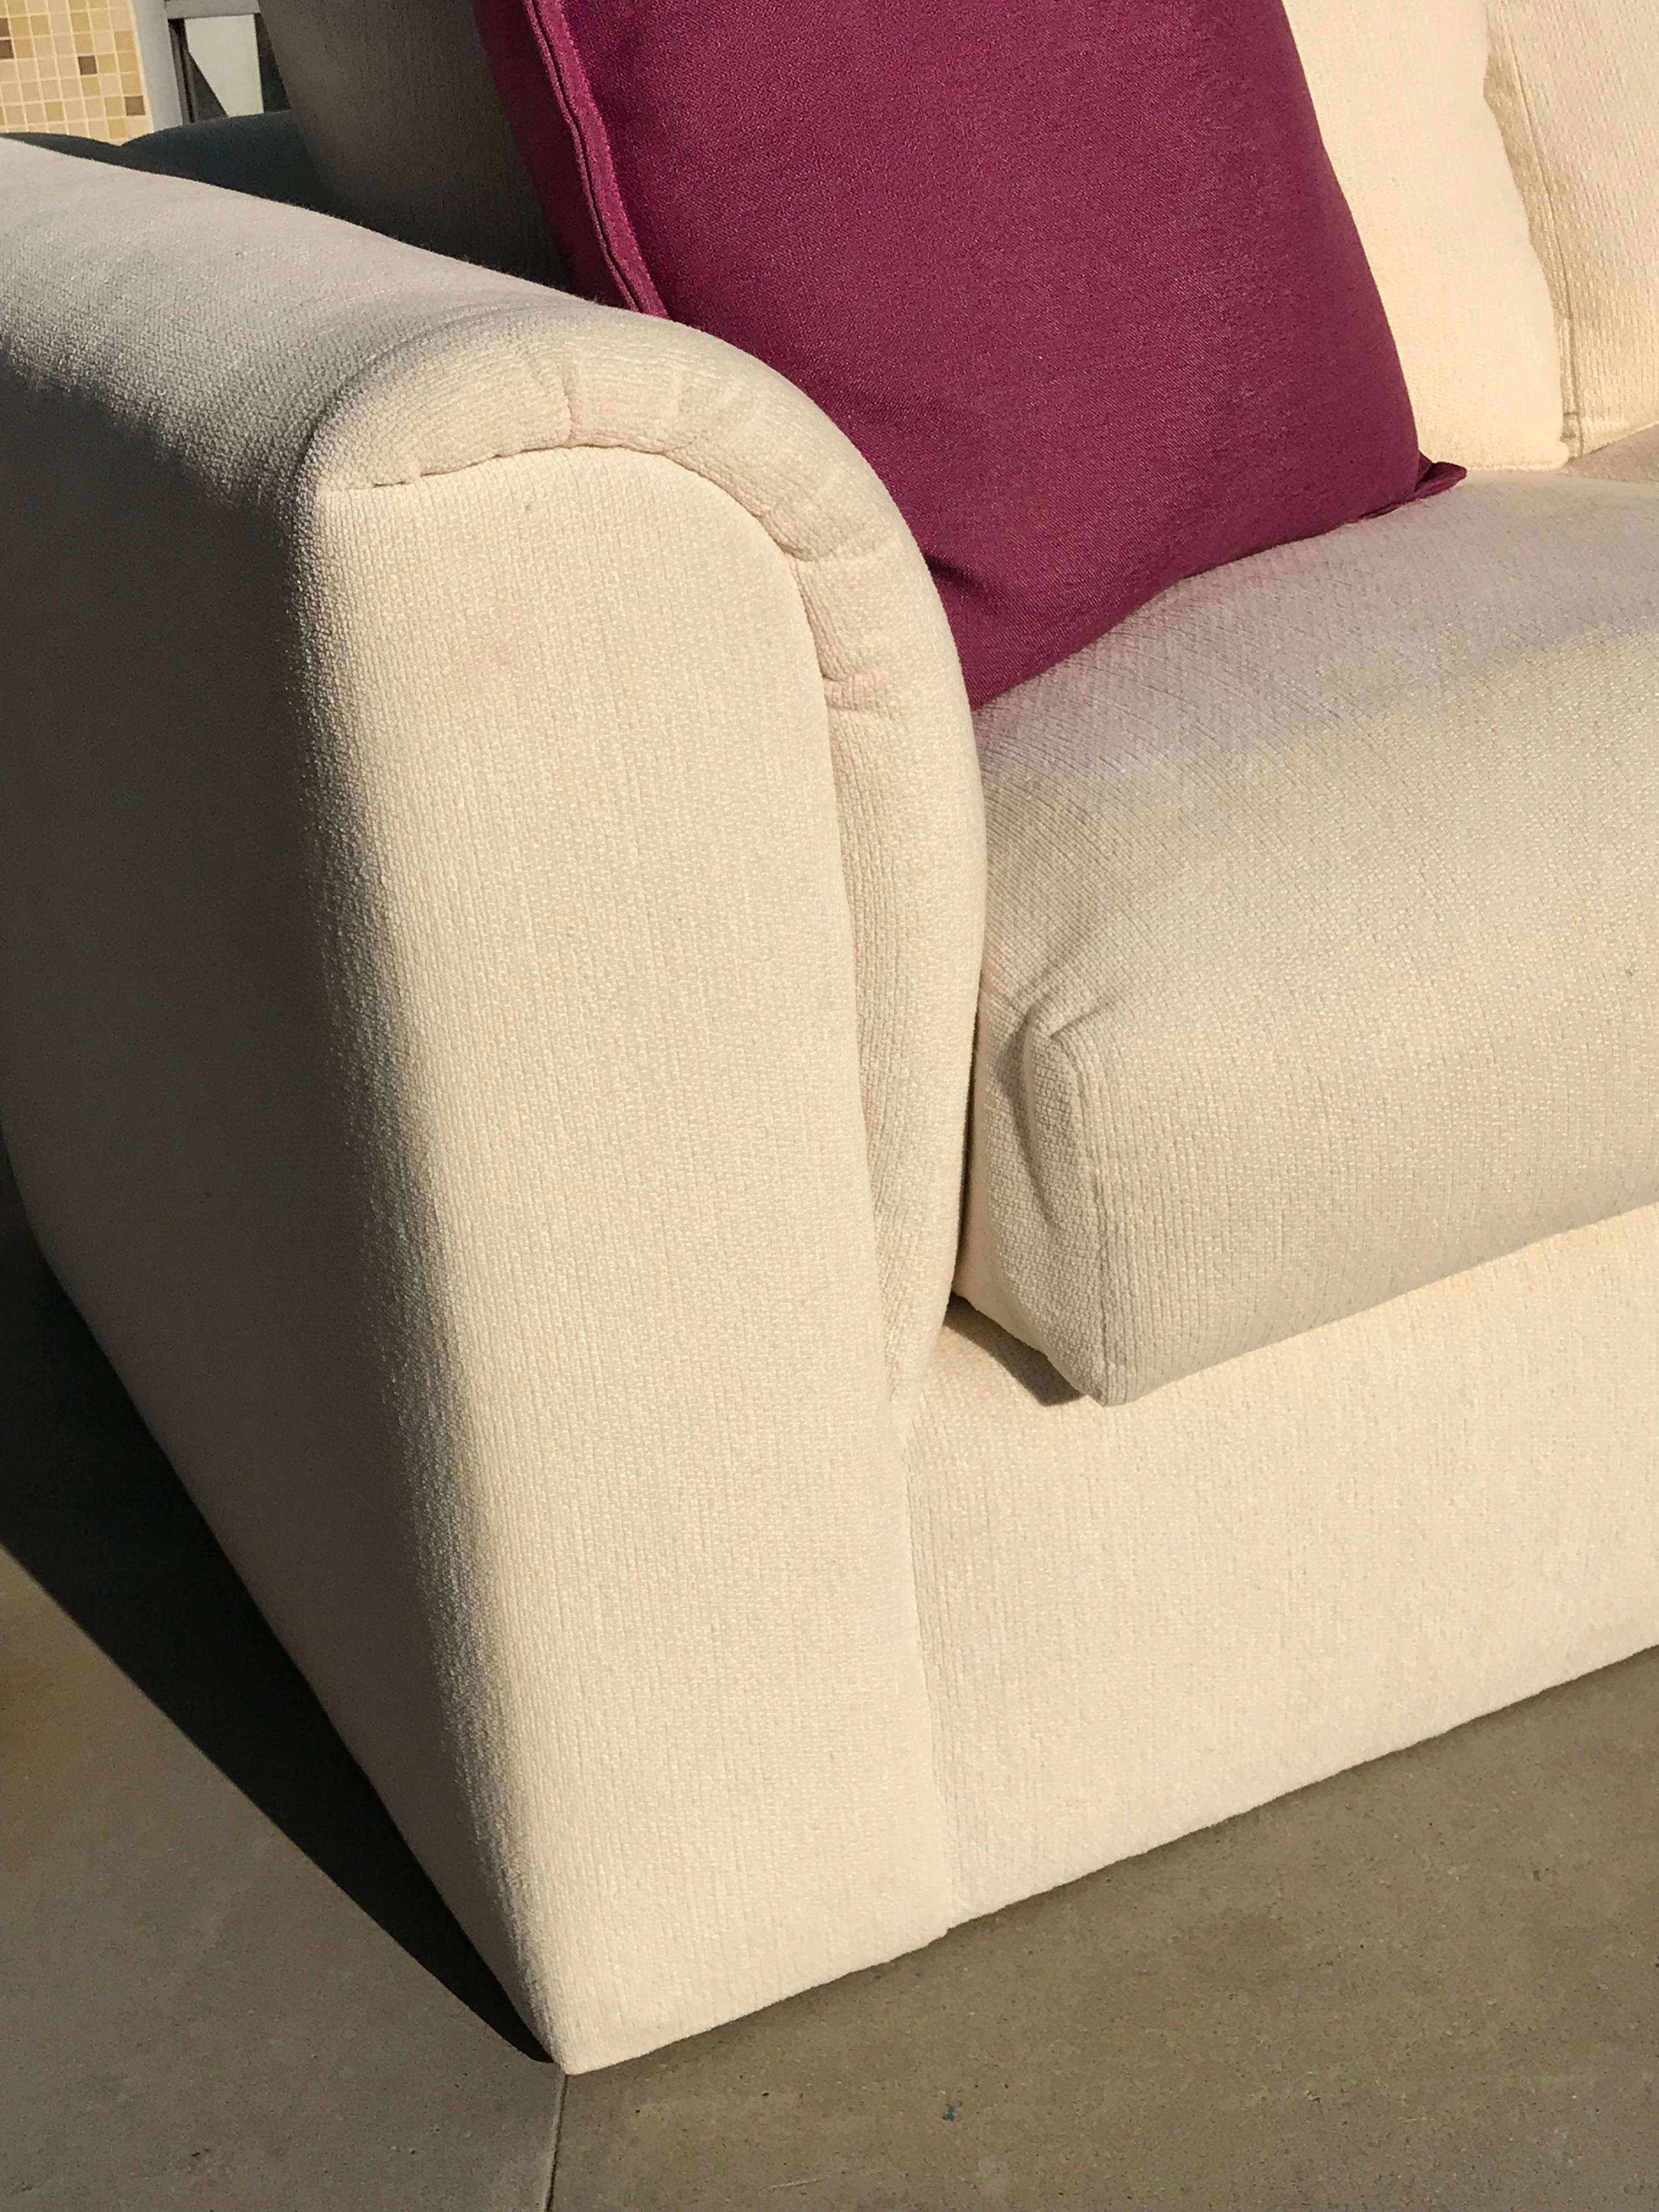 This sofa designed by Sally Sirkin Lewis for J. Robert Scott came from an upscale Rancho Mirage Country Club Estate. It was seldom used as is as comfortable as it is good looking. Matching club chair available on separate listing. The back cushions